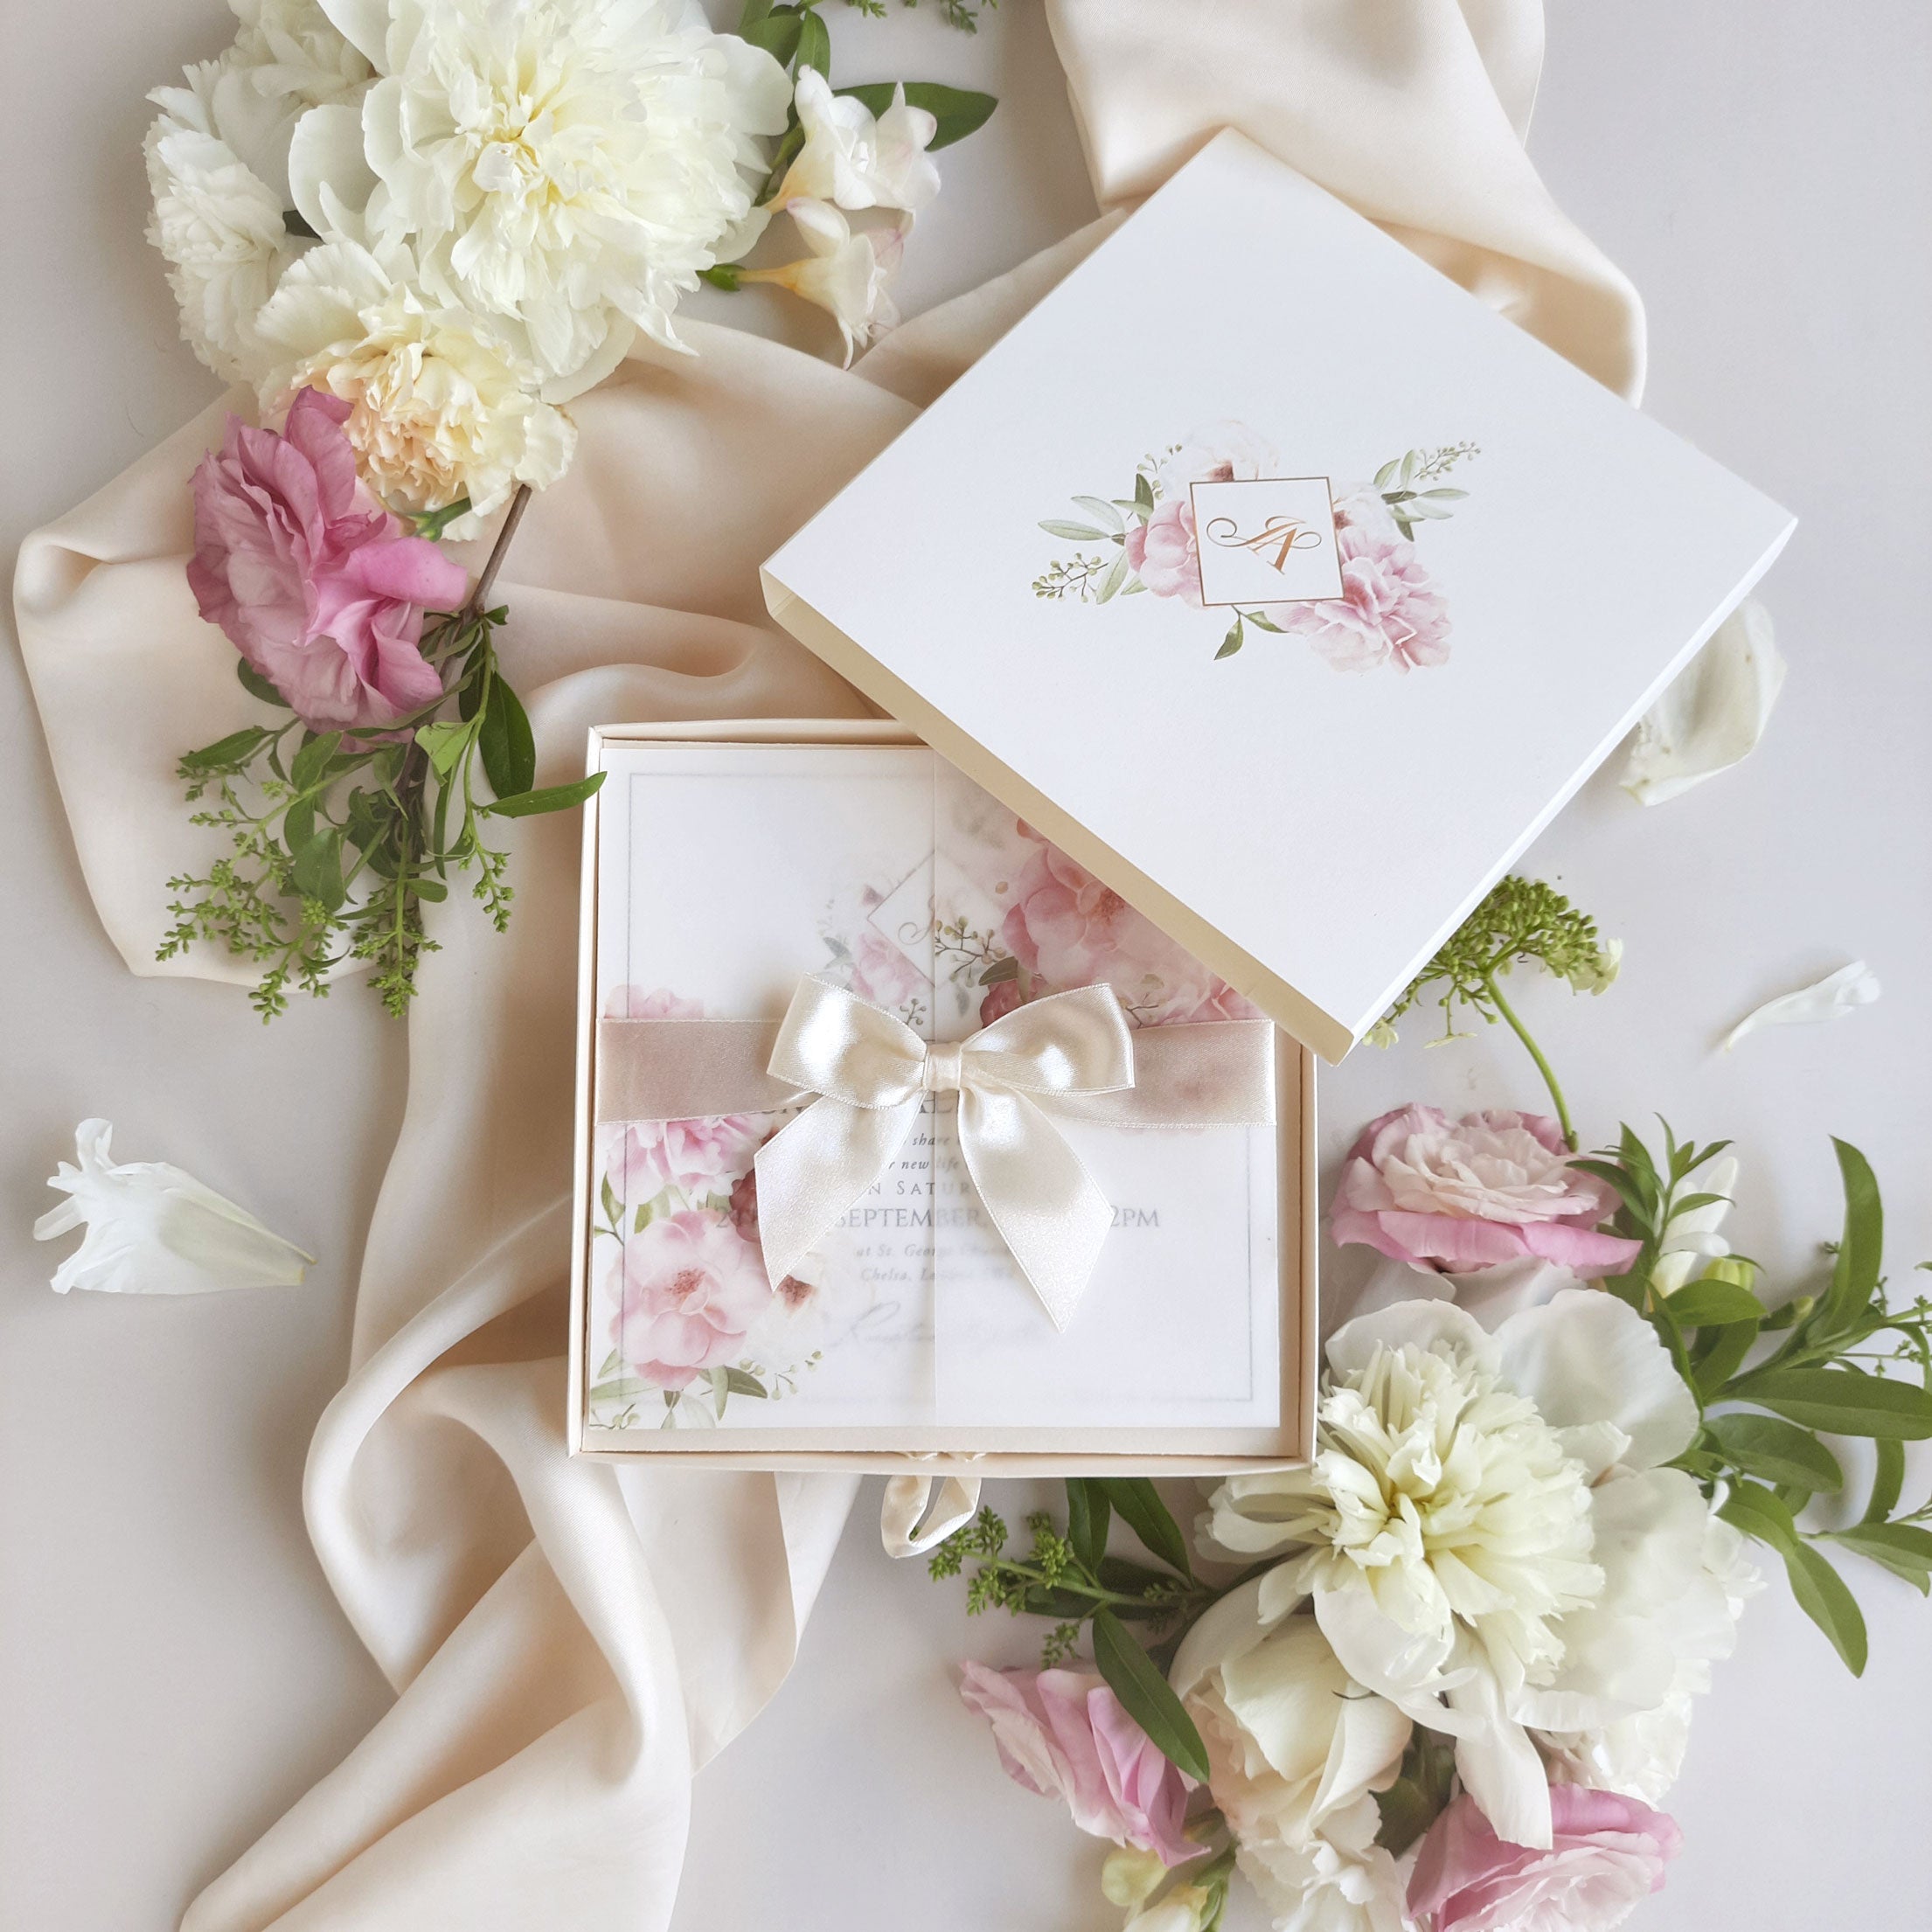 Wedding Gift Tips for Guests When There Is No Registry